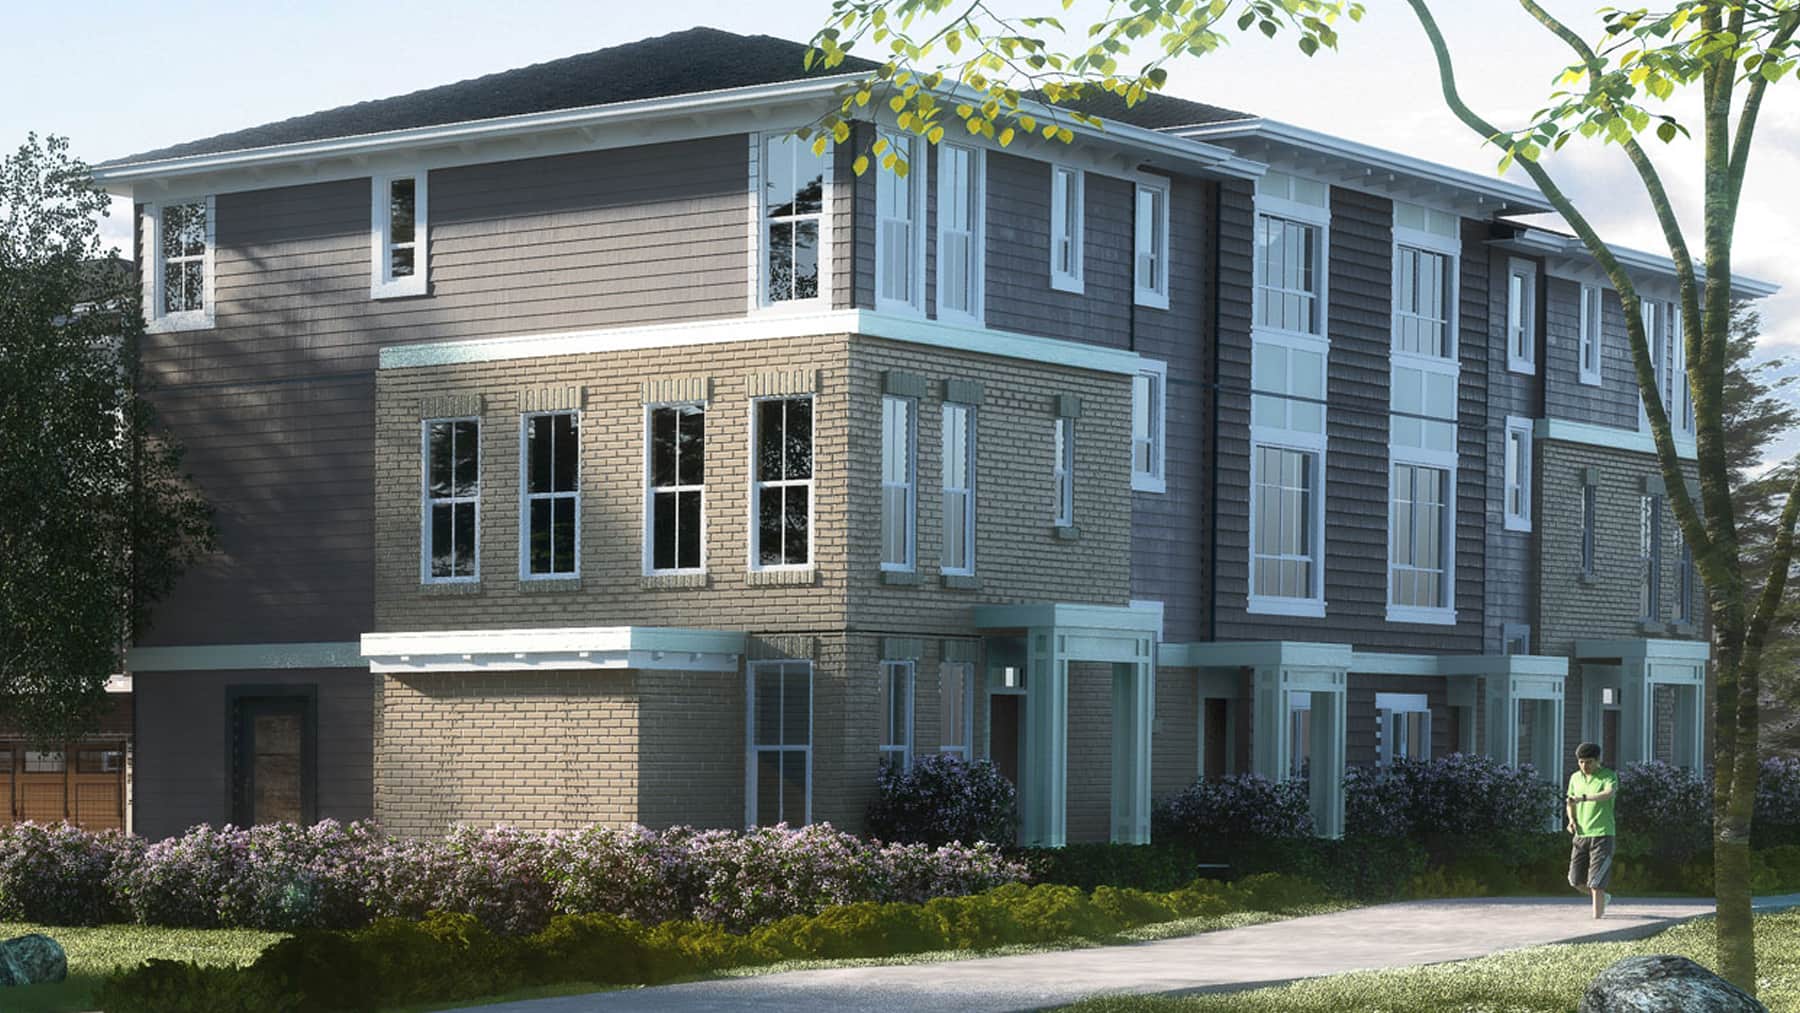 Georgian-style, 3-storey townhomes with shake and shiplap siding and light colour brick highlights.